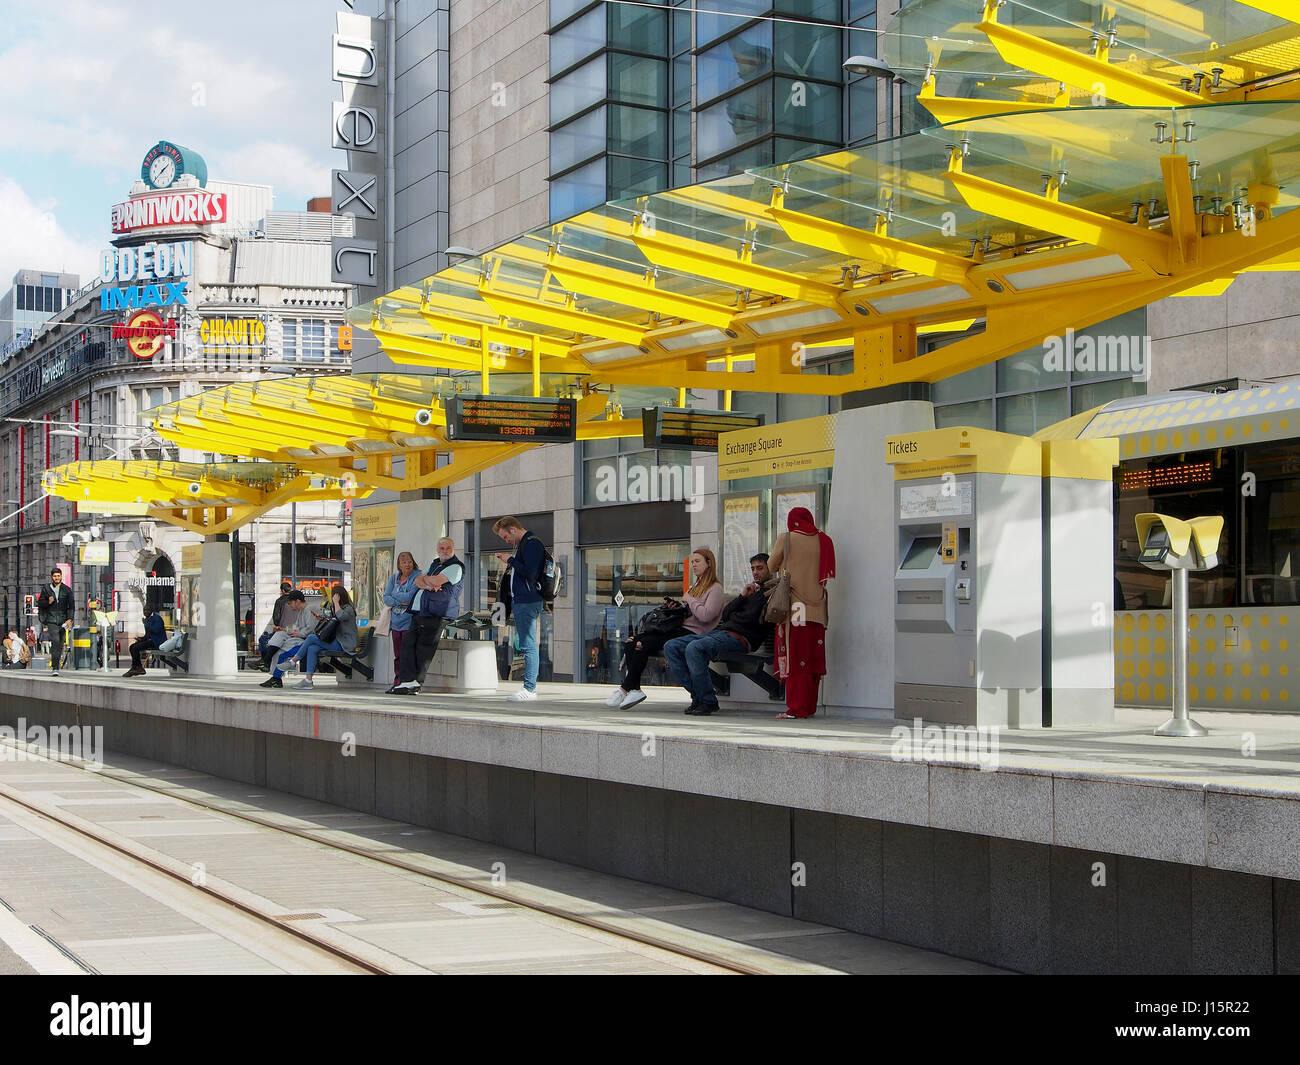 Exchange Square in the centre of Manchester, England, showing people on the tram platform, with the colorful colourful Printworks in the background. Stock Photo